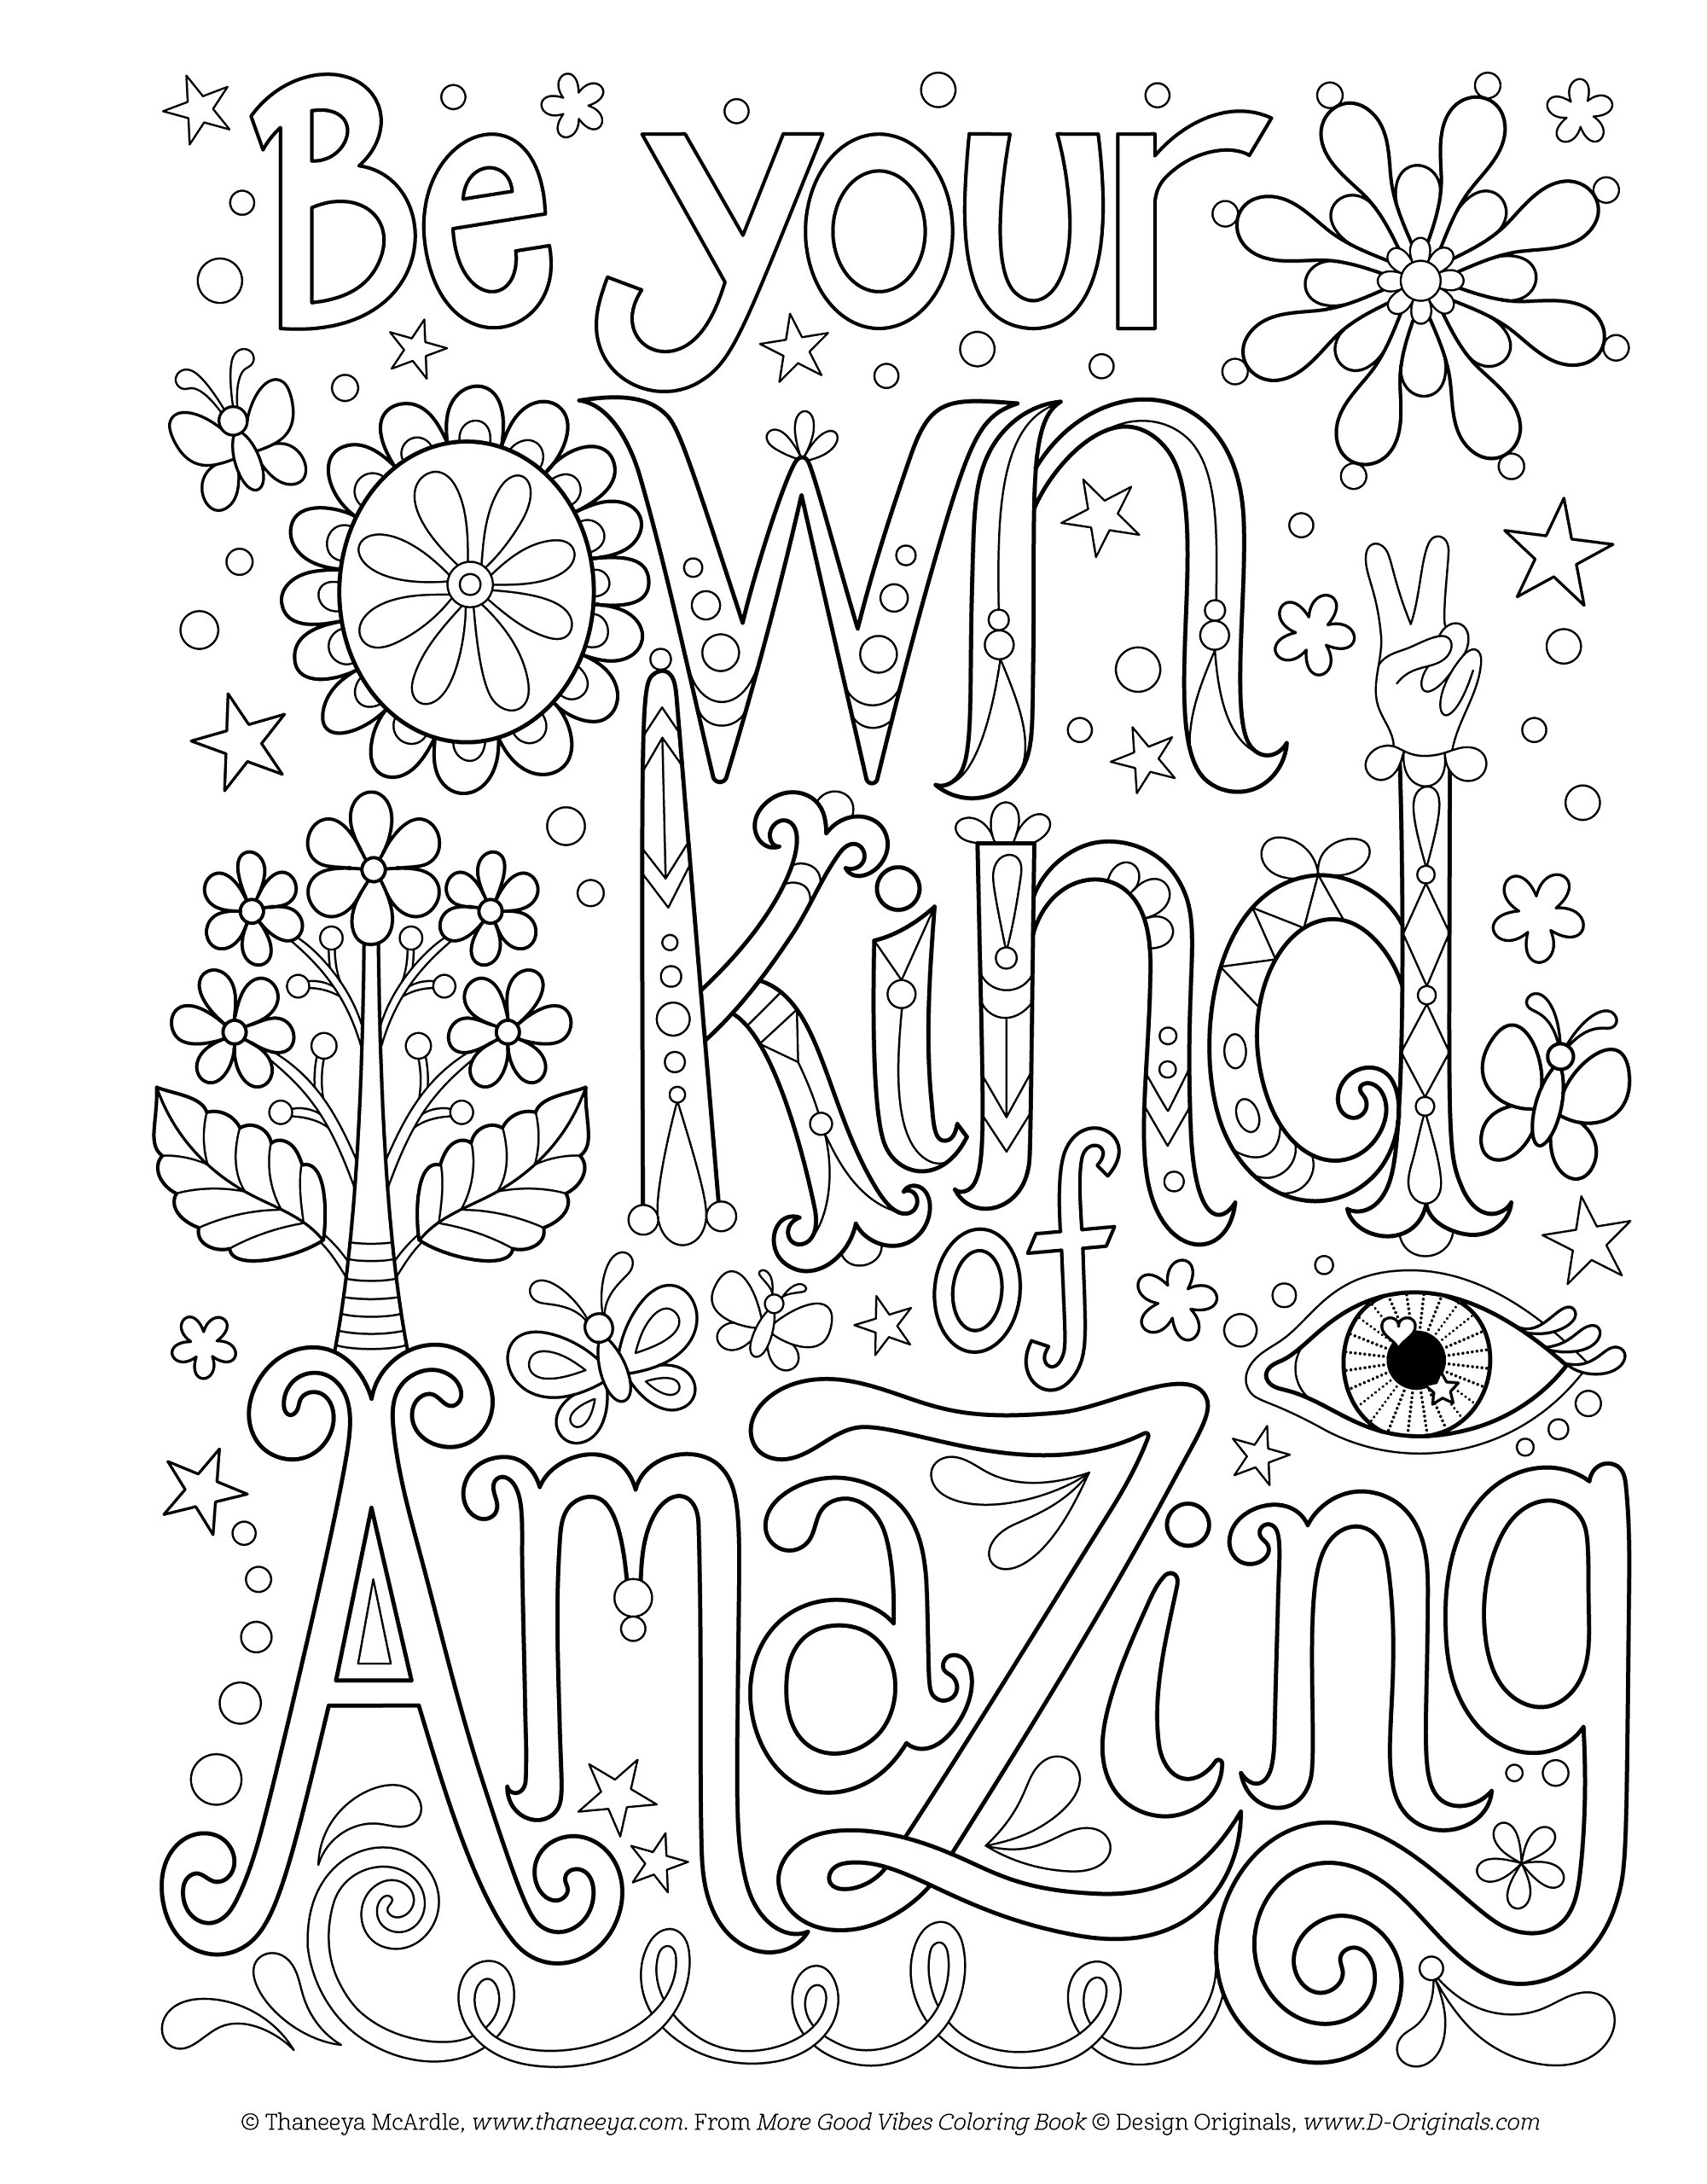 More Good Vibes Coloring Book (Coloring is Fun) : McArdle, Thaneeya:  Amazon.in: Books